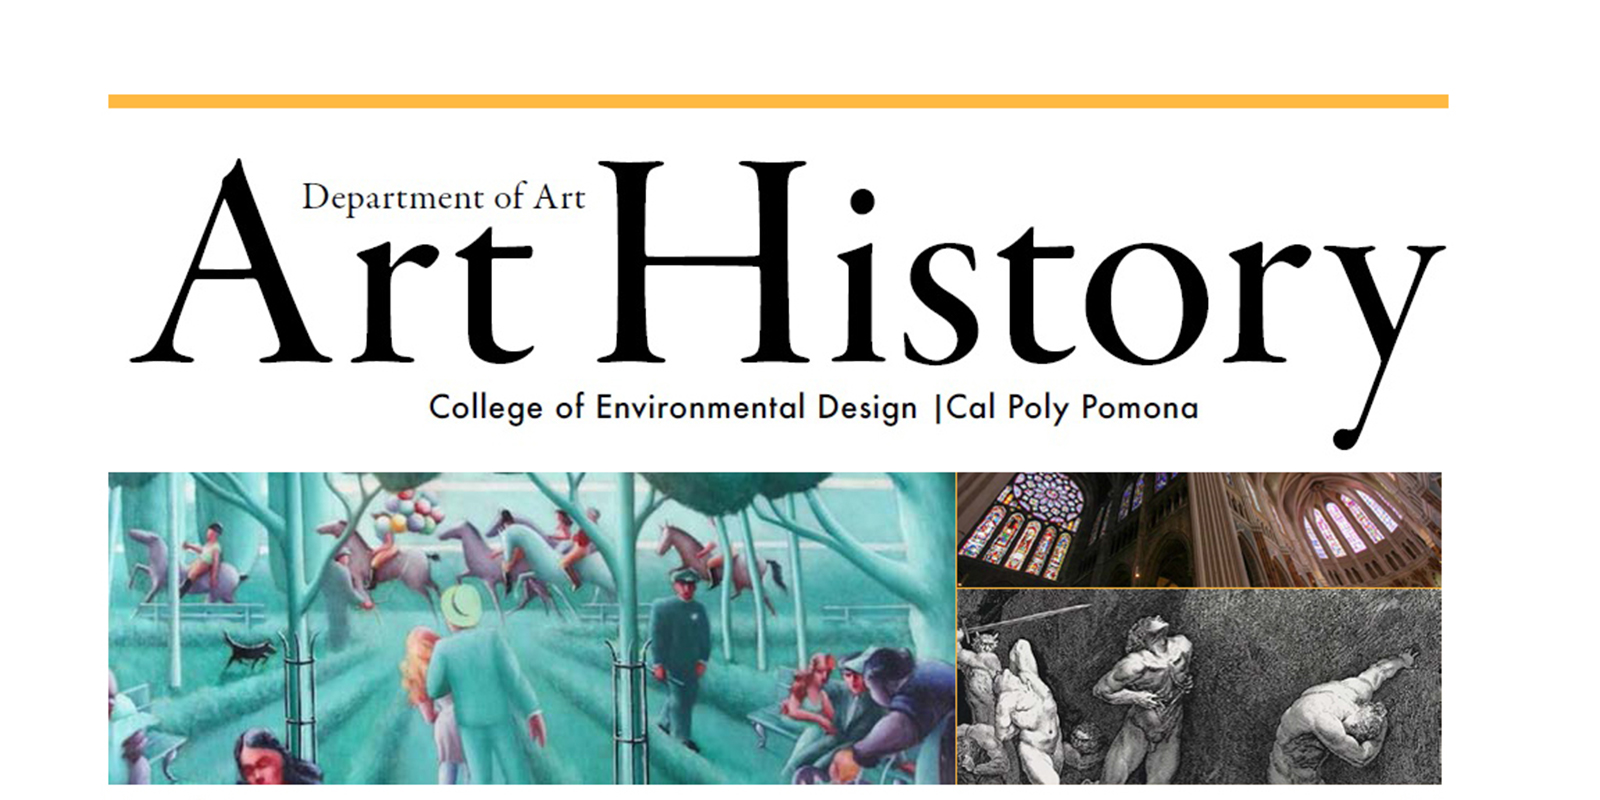 College of Environmental Design | Cal Poly Pomona.  Art History.  Issue No. 1 | 2016-17.  In this Edition, Art History Senior Projects.  No Returns Policy: The British Museum & Repatriation, The Storyteller of the Harlem Renaissance + more.  News, Graduating seniors | Alumni on the move Education and protecting artwork at the Broad